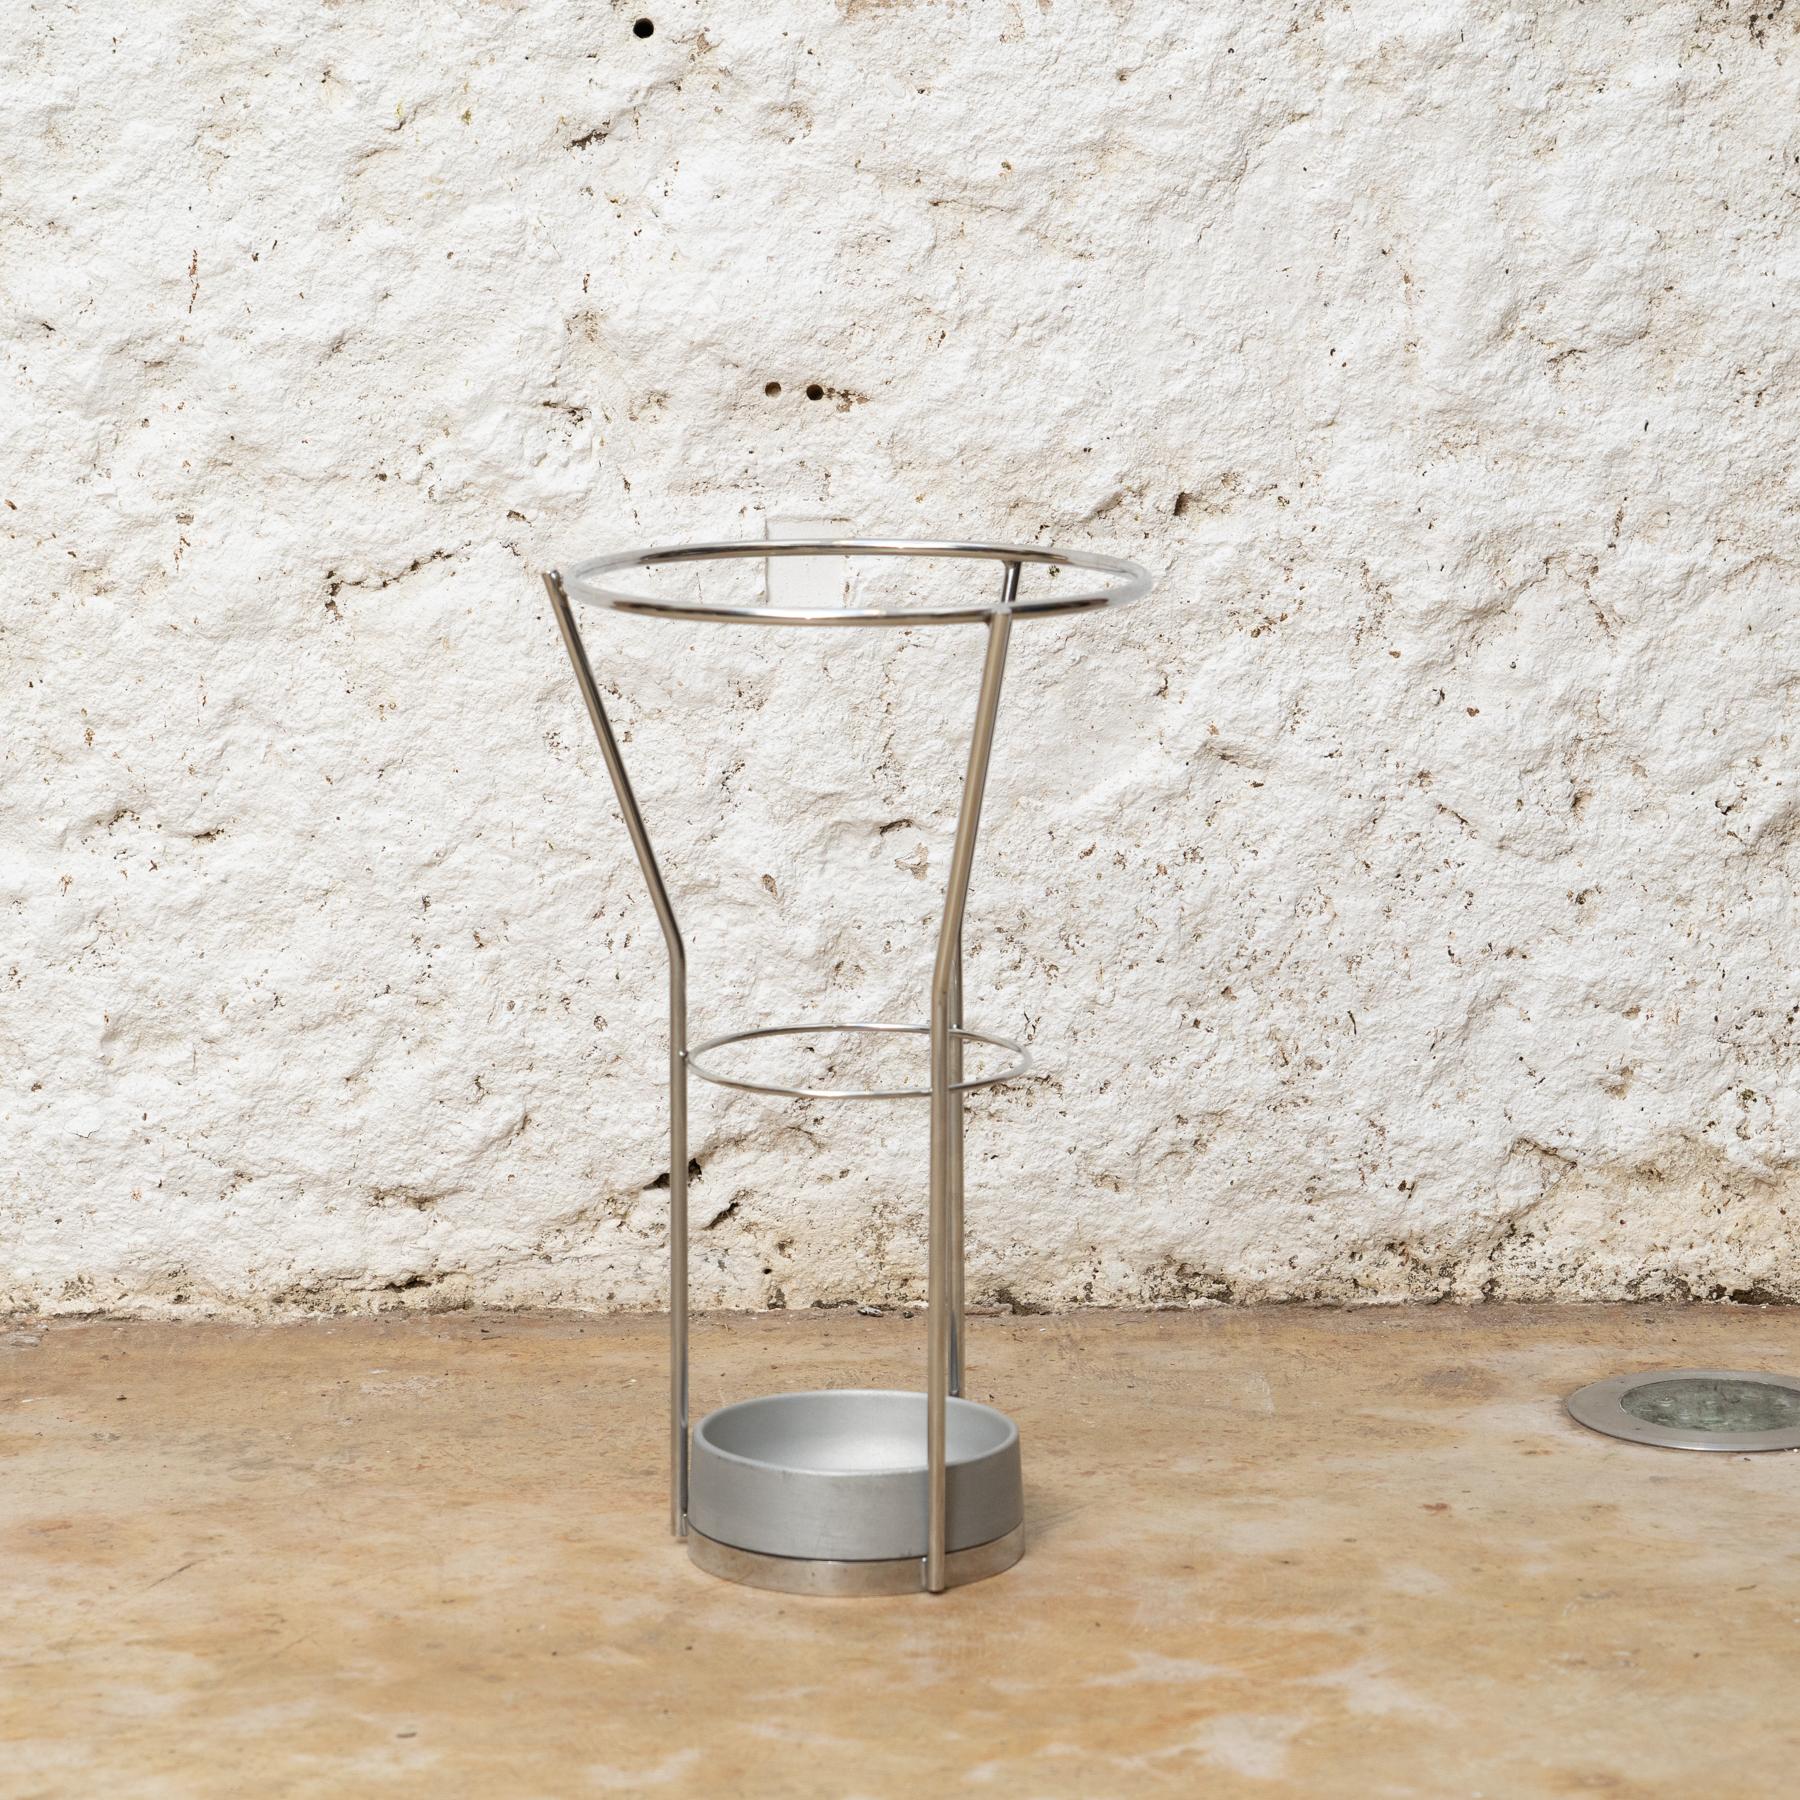 Mid-Century Modern Umbrella Stand Tomba’l by Miguel Milà for Misel·lania, circa 1989 For Sale